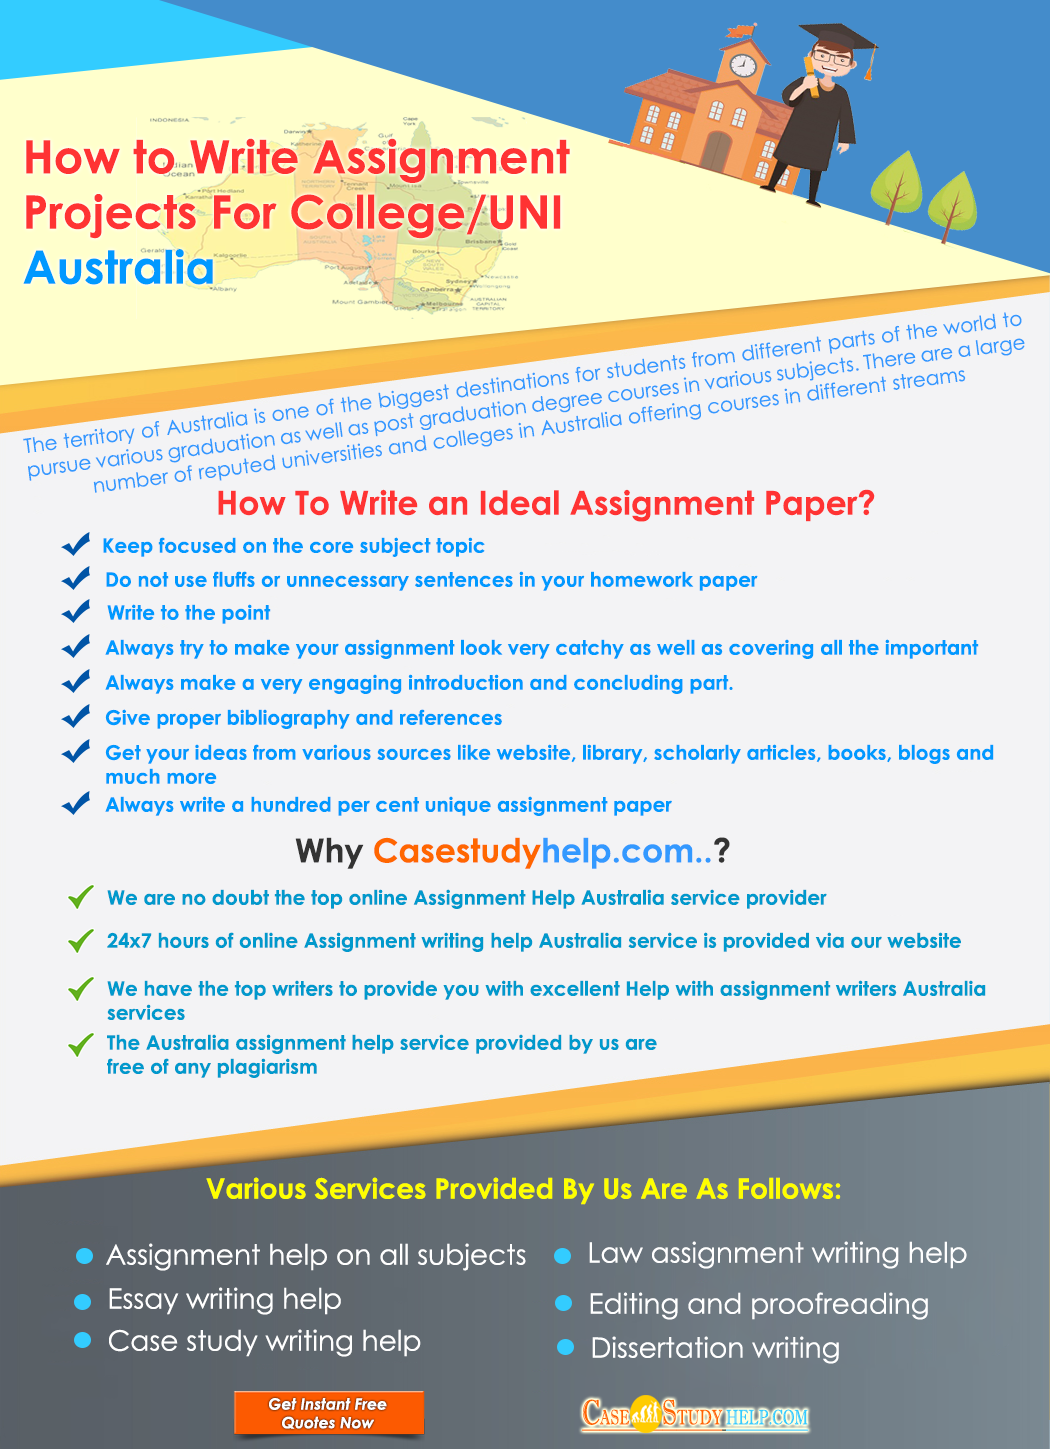 How to Write an Assignment, Step by Step Guide